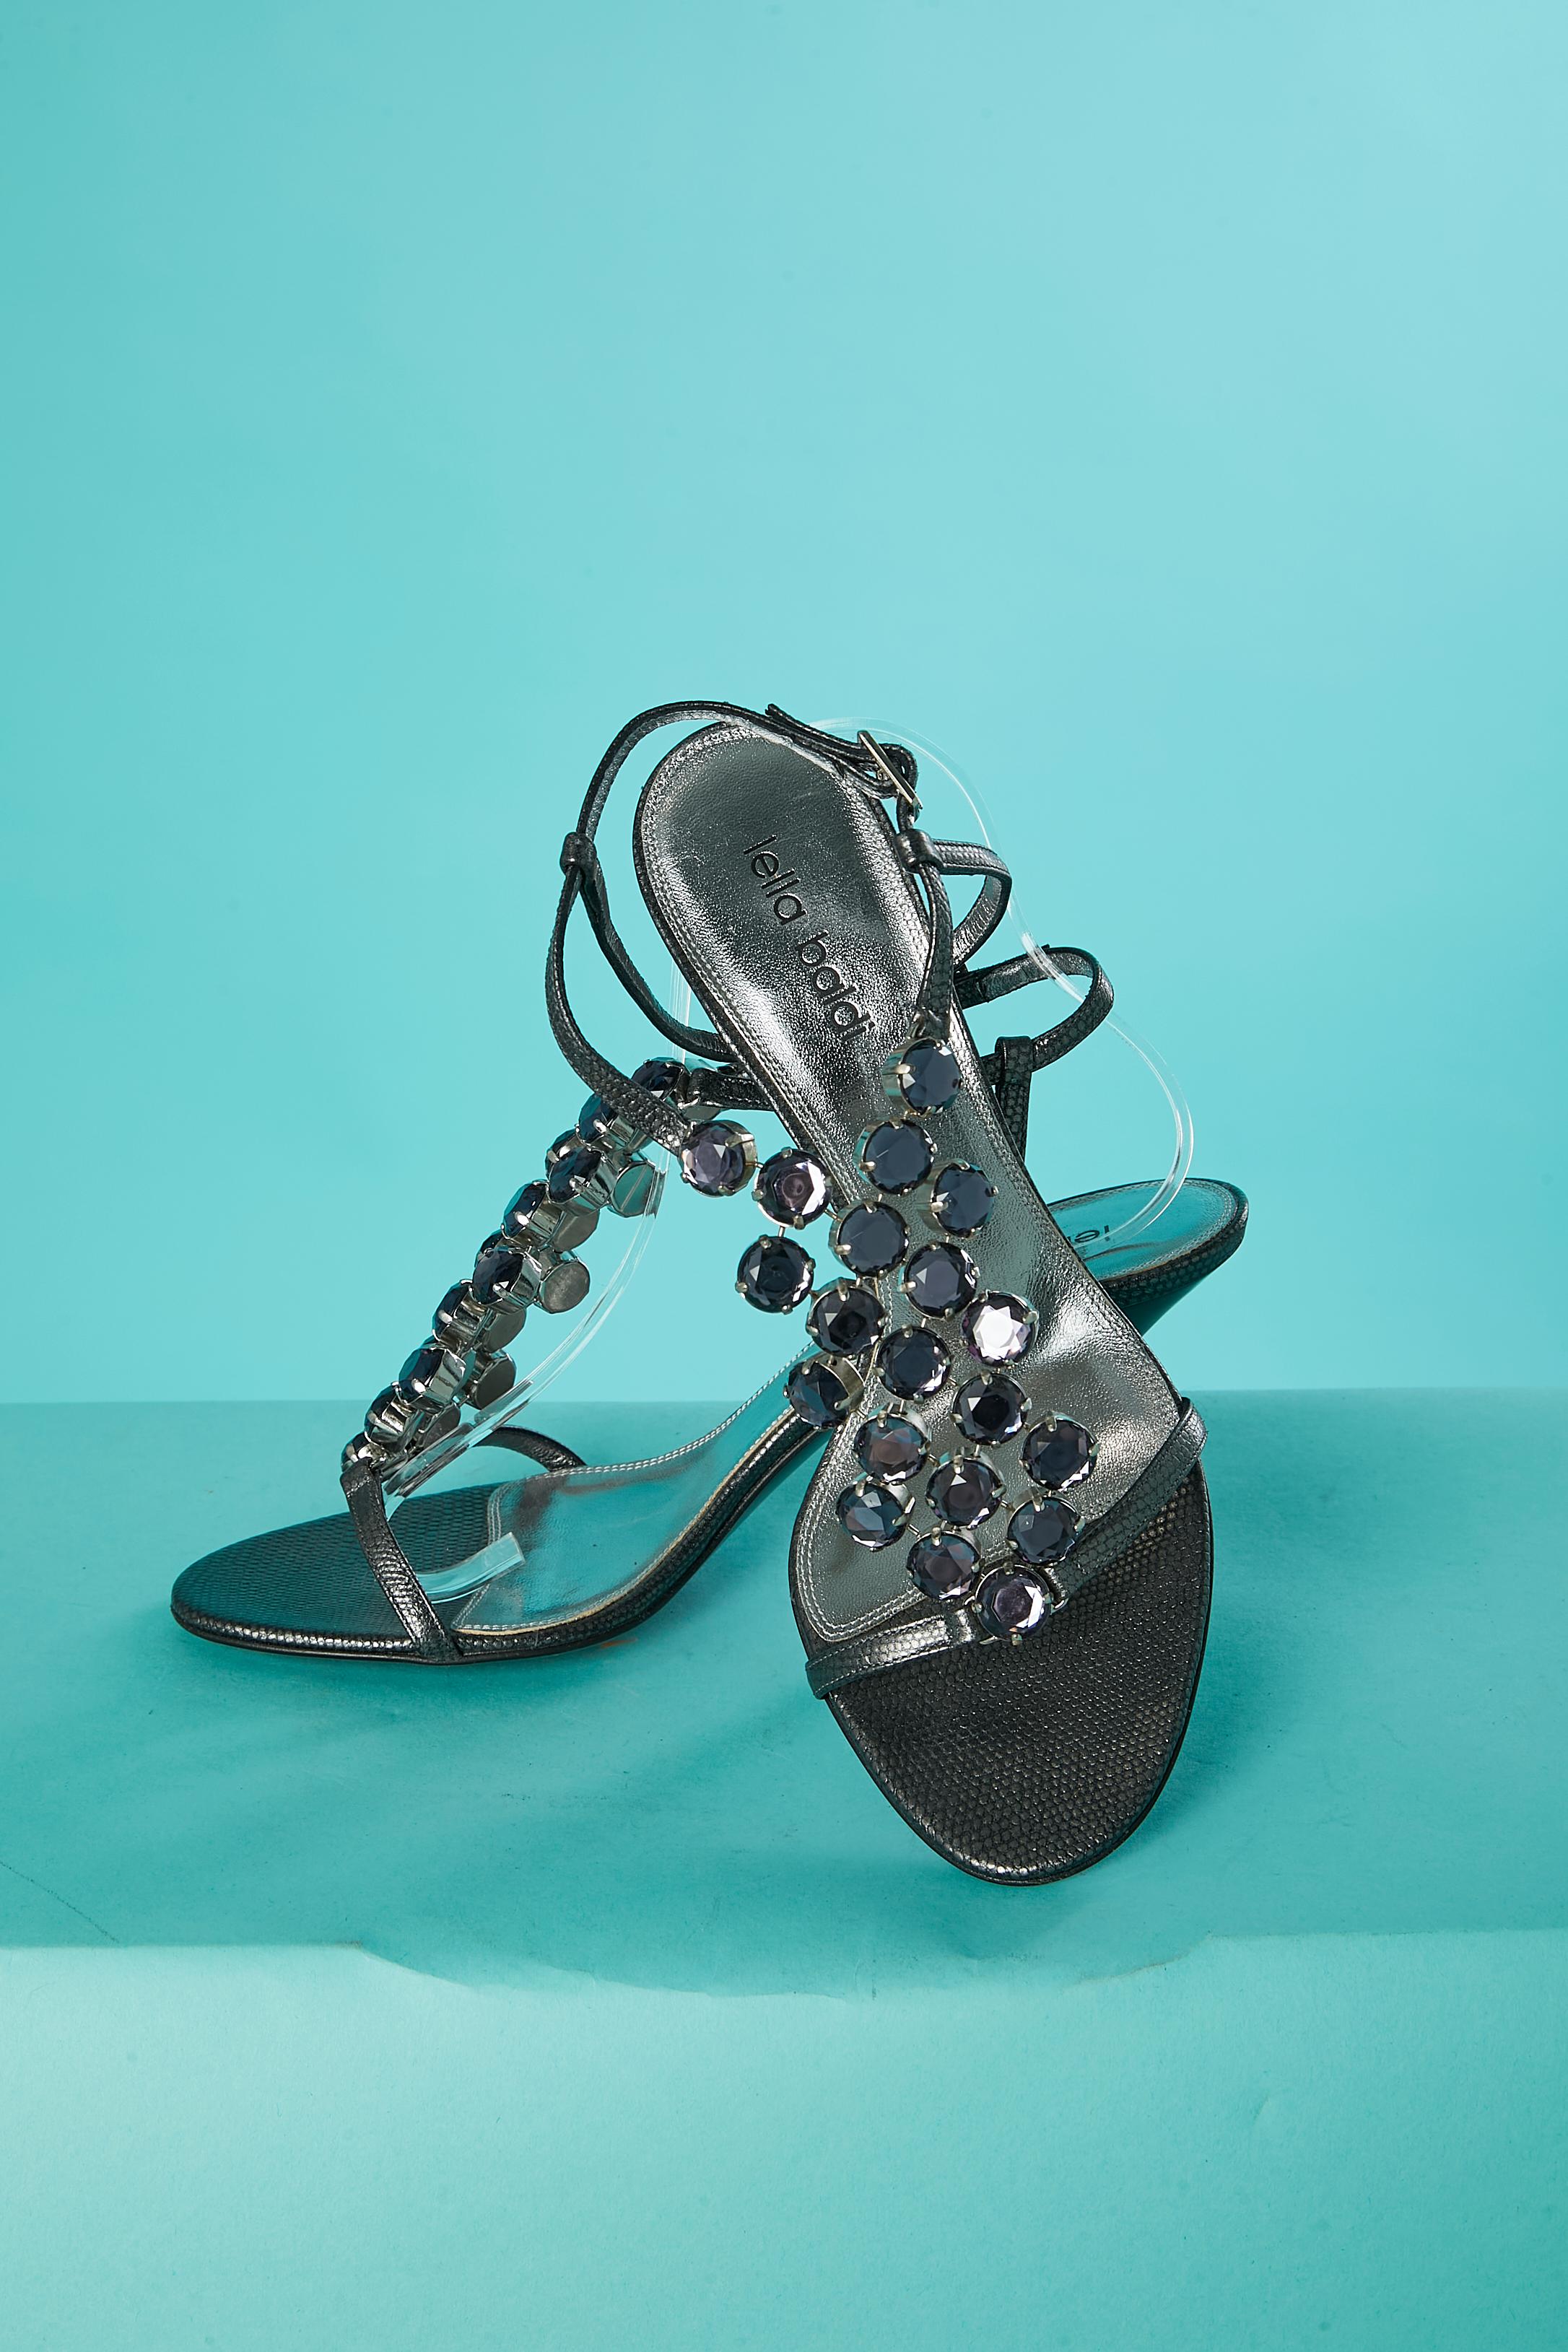 High heels evening sandals in silver leather and cabochons Lella Baldi  In Excellent Condition For Sale In Saint-Ouen-Sur-Seine, FR